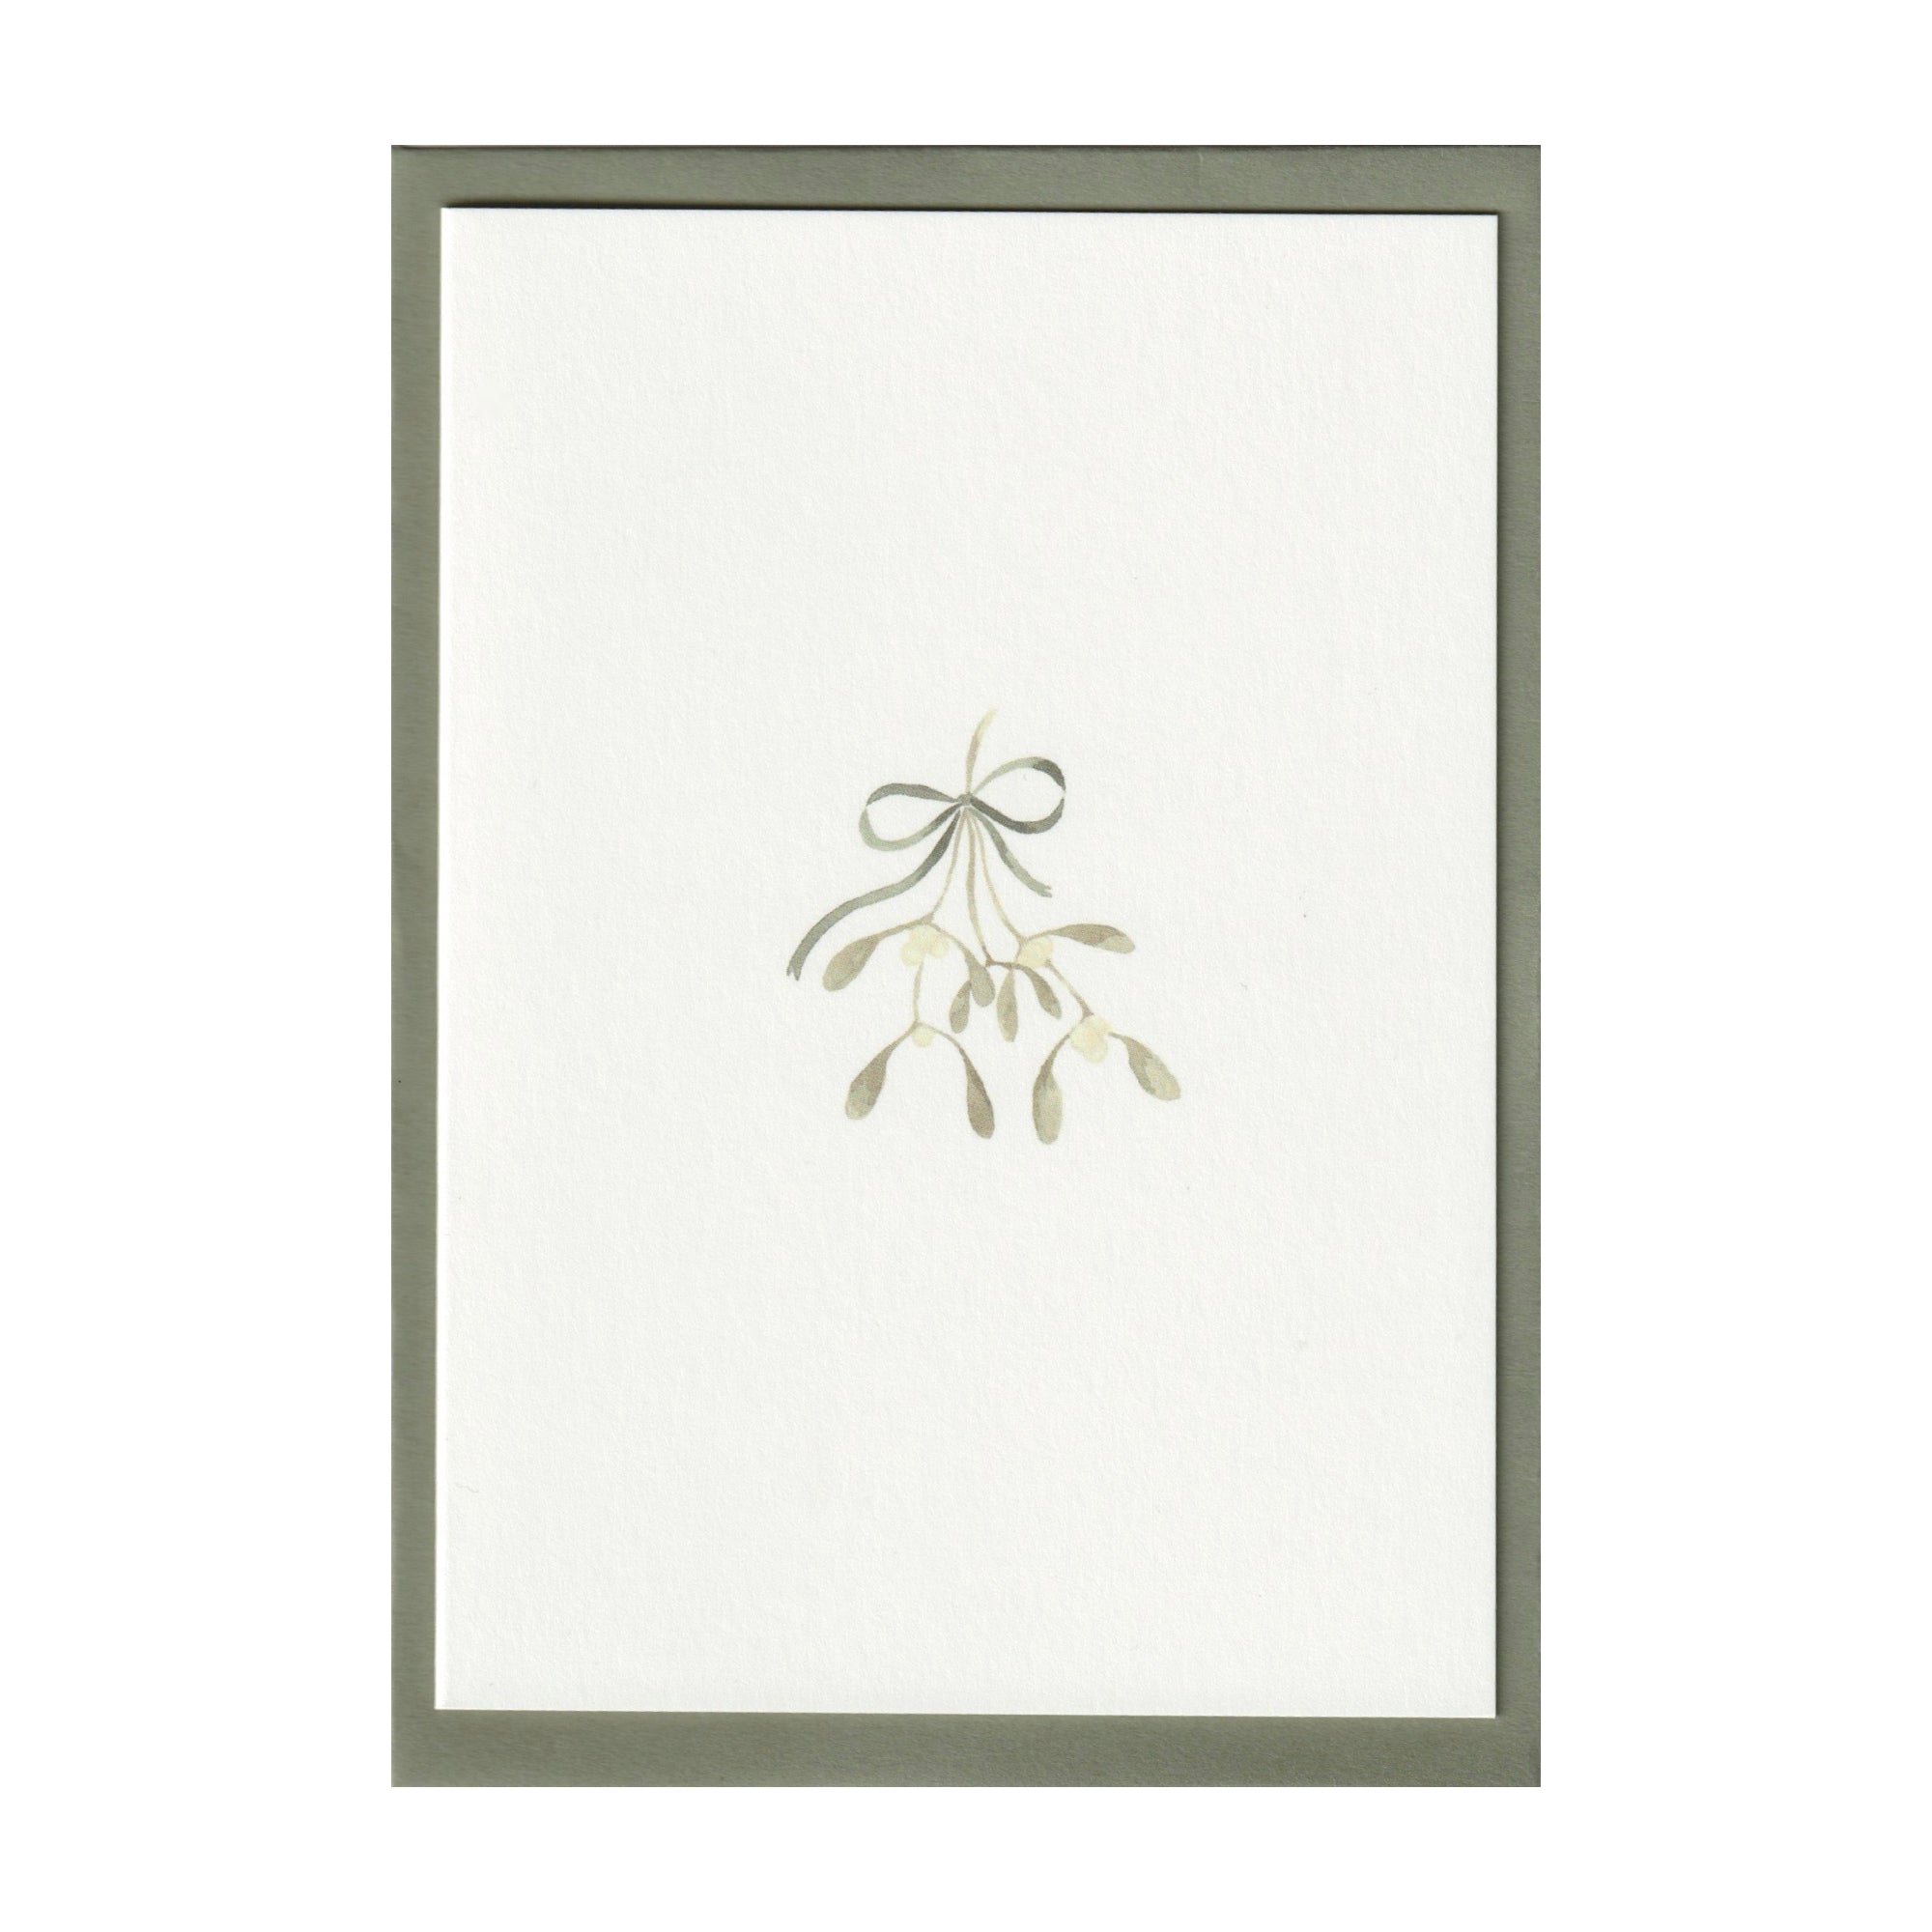 Luxury Christmas Card by Memo Press with a watercolour illustration of mistletoe tied with a ribbon tied with a bow and comes with a green envelope made in Britain